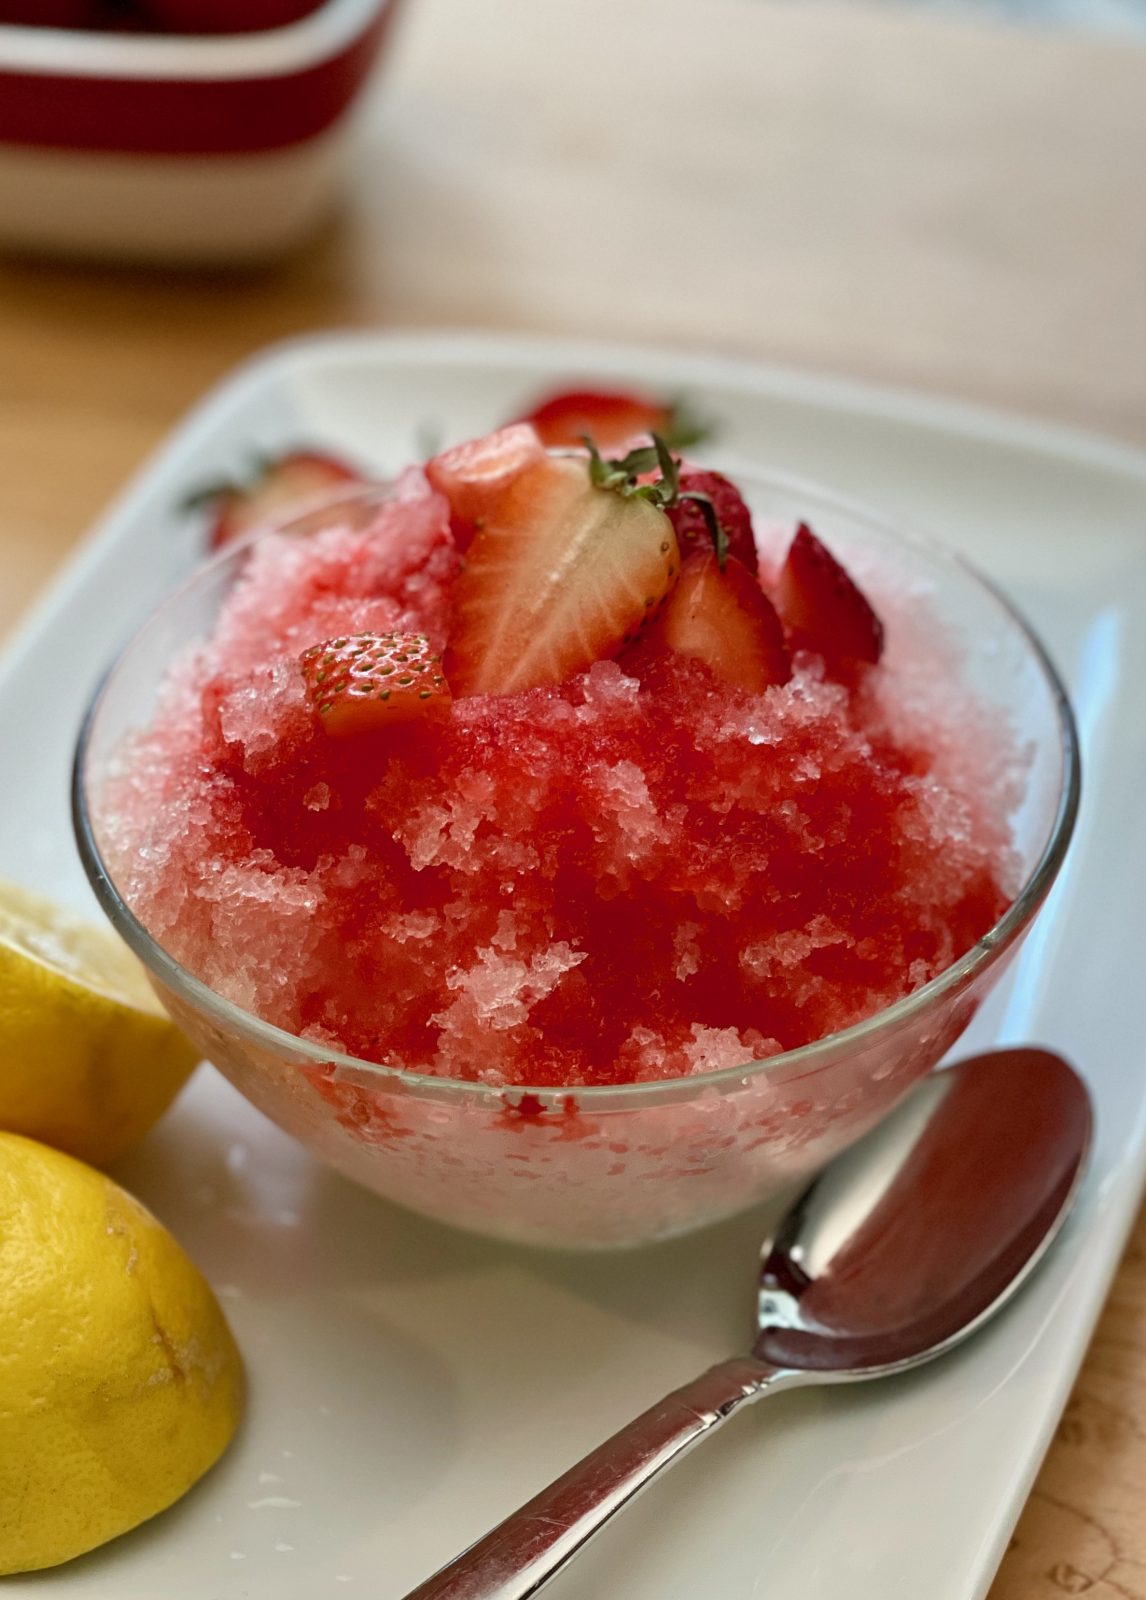 https://www.epicuricloud.com/wp-content/uploads/2022/05/Shave-Ice-Strawberry-Lemonade-w-Syrup-1146x1600.jpeg